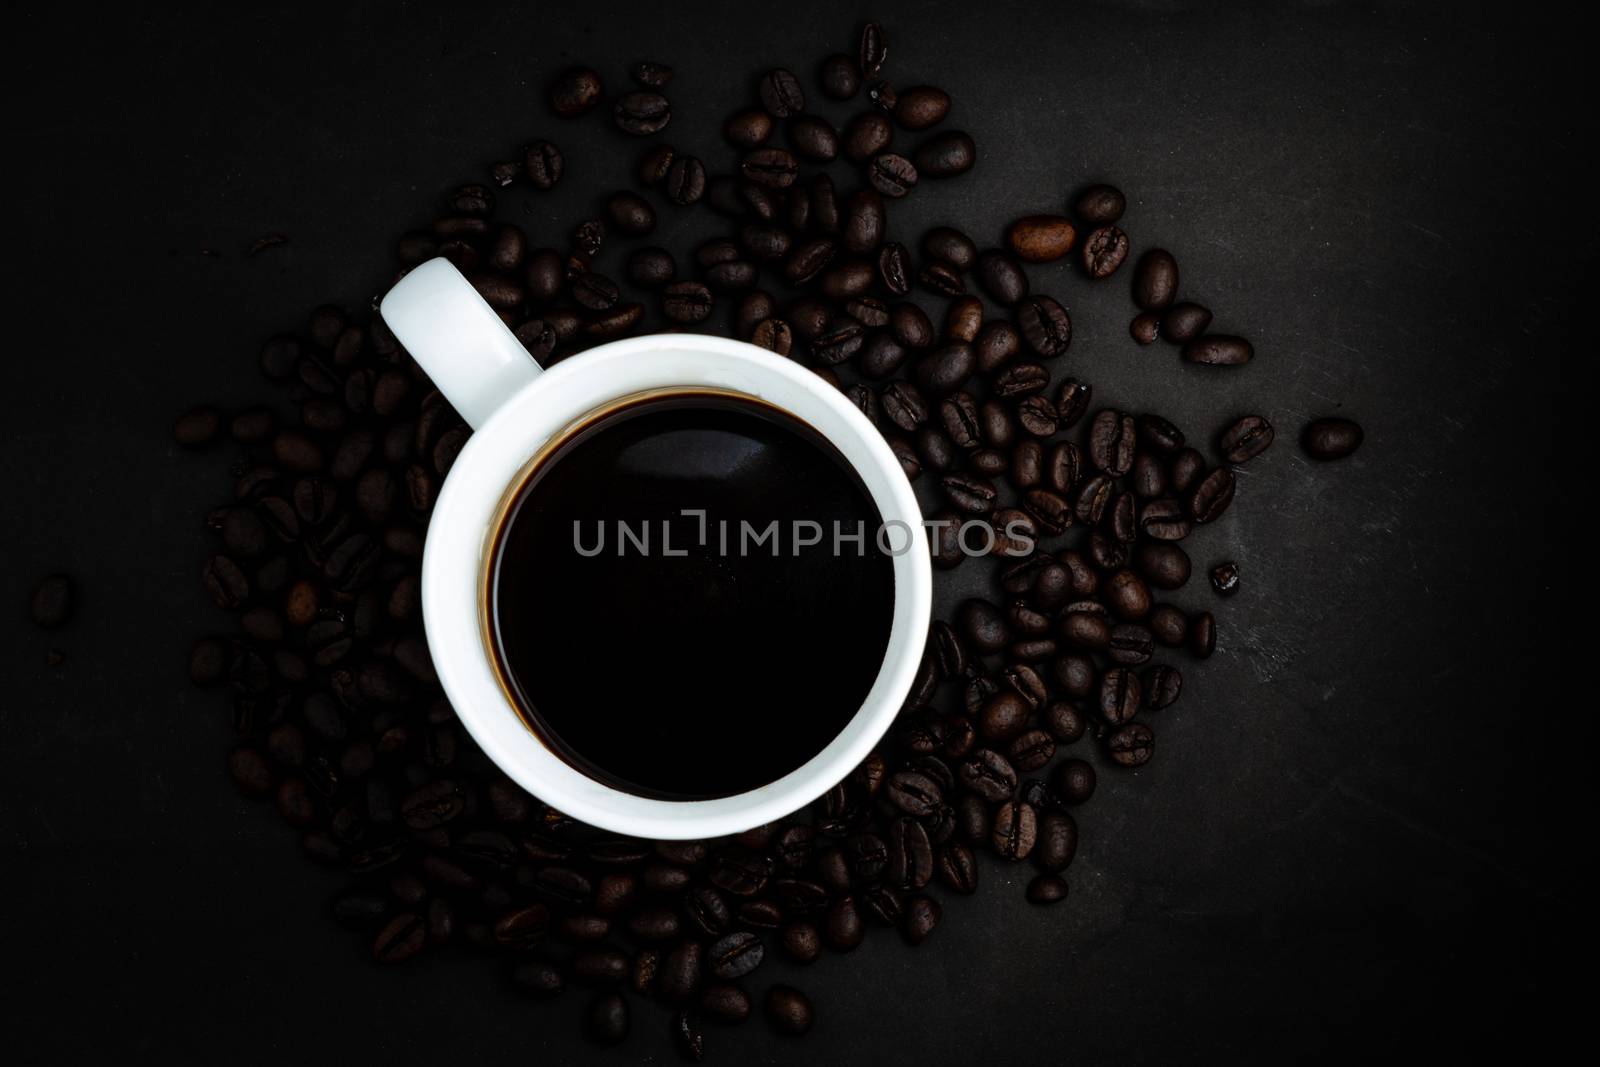 The Top view of Instant coffee in cup on dark background with beans and space for putting text